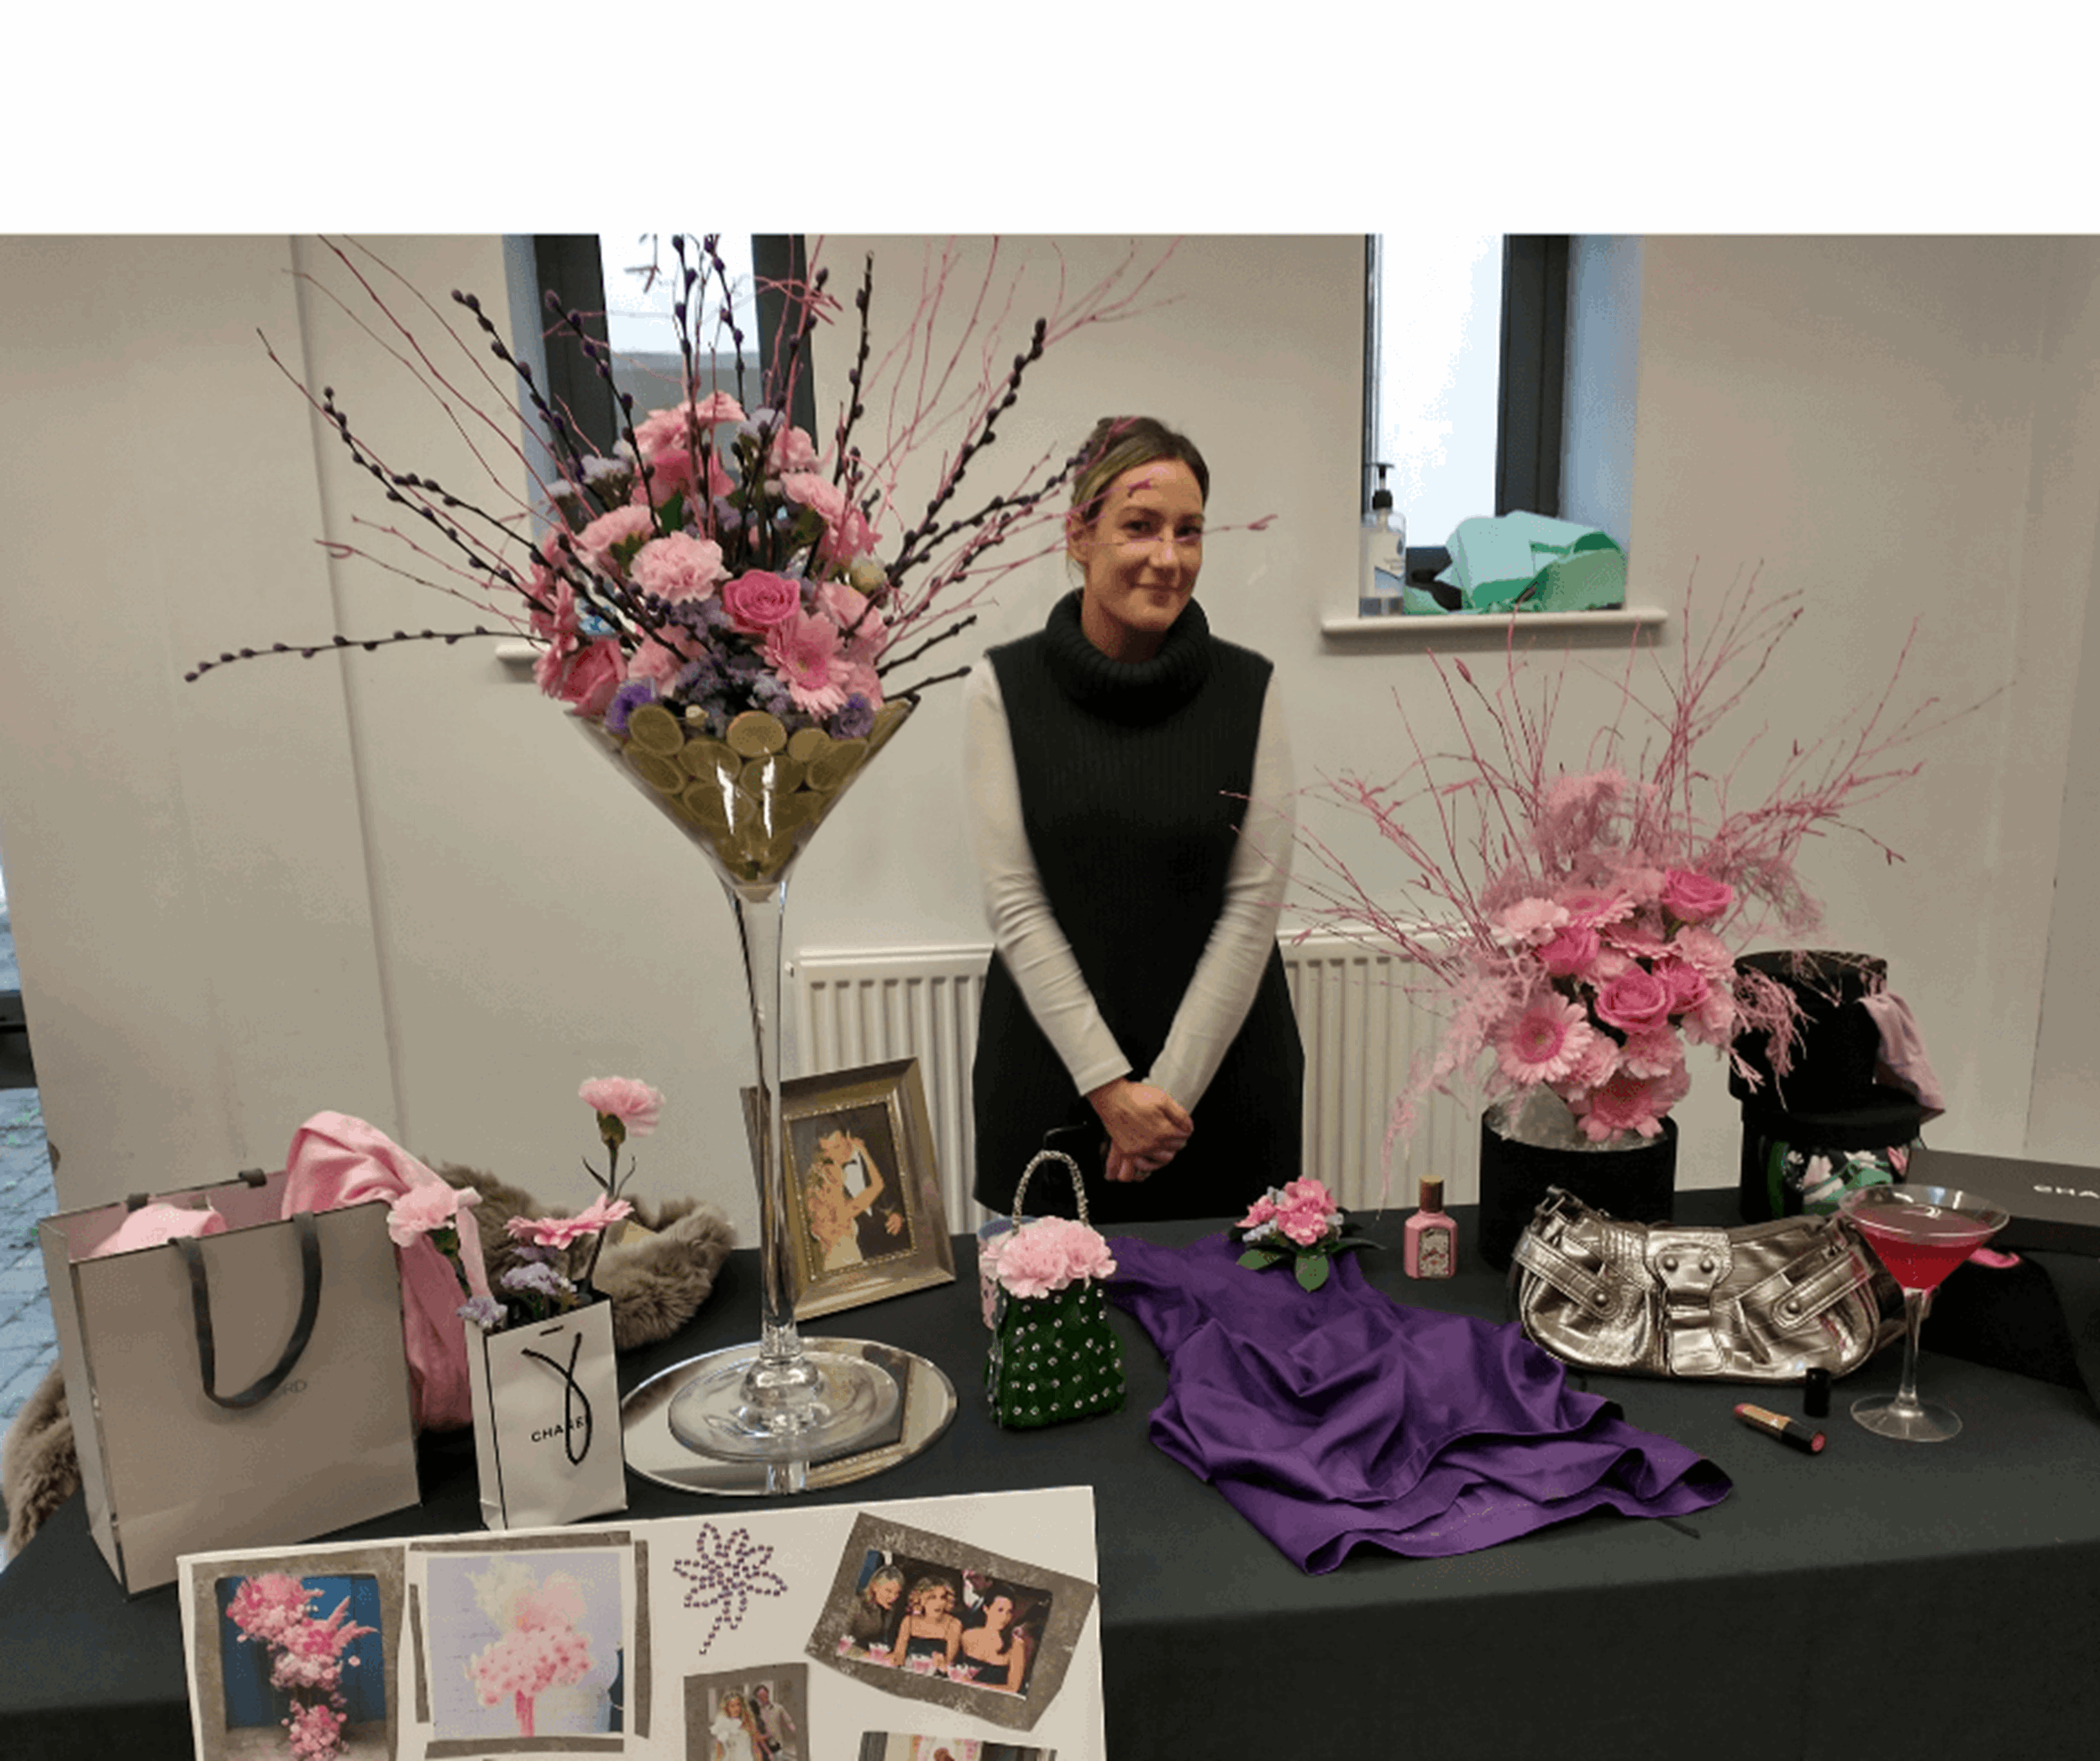 Pink floral display and learner